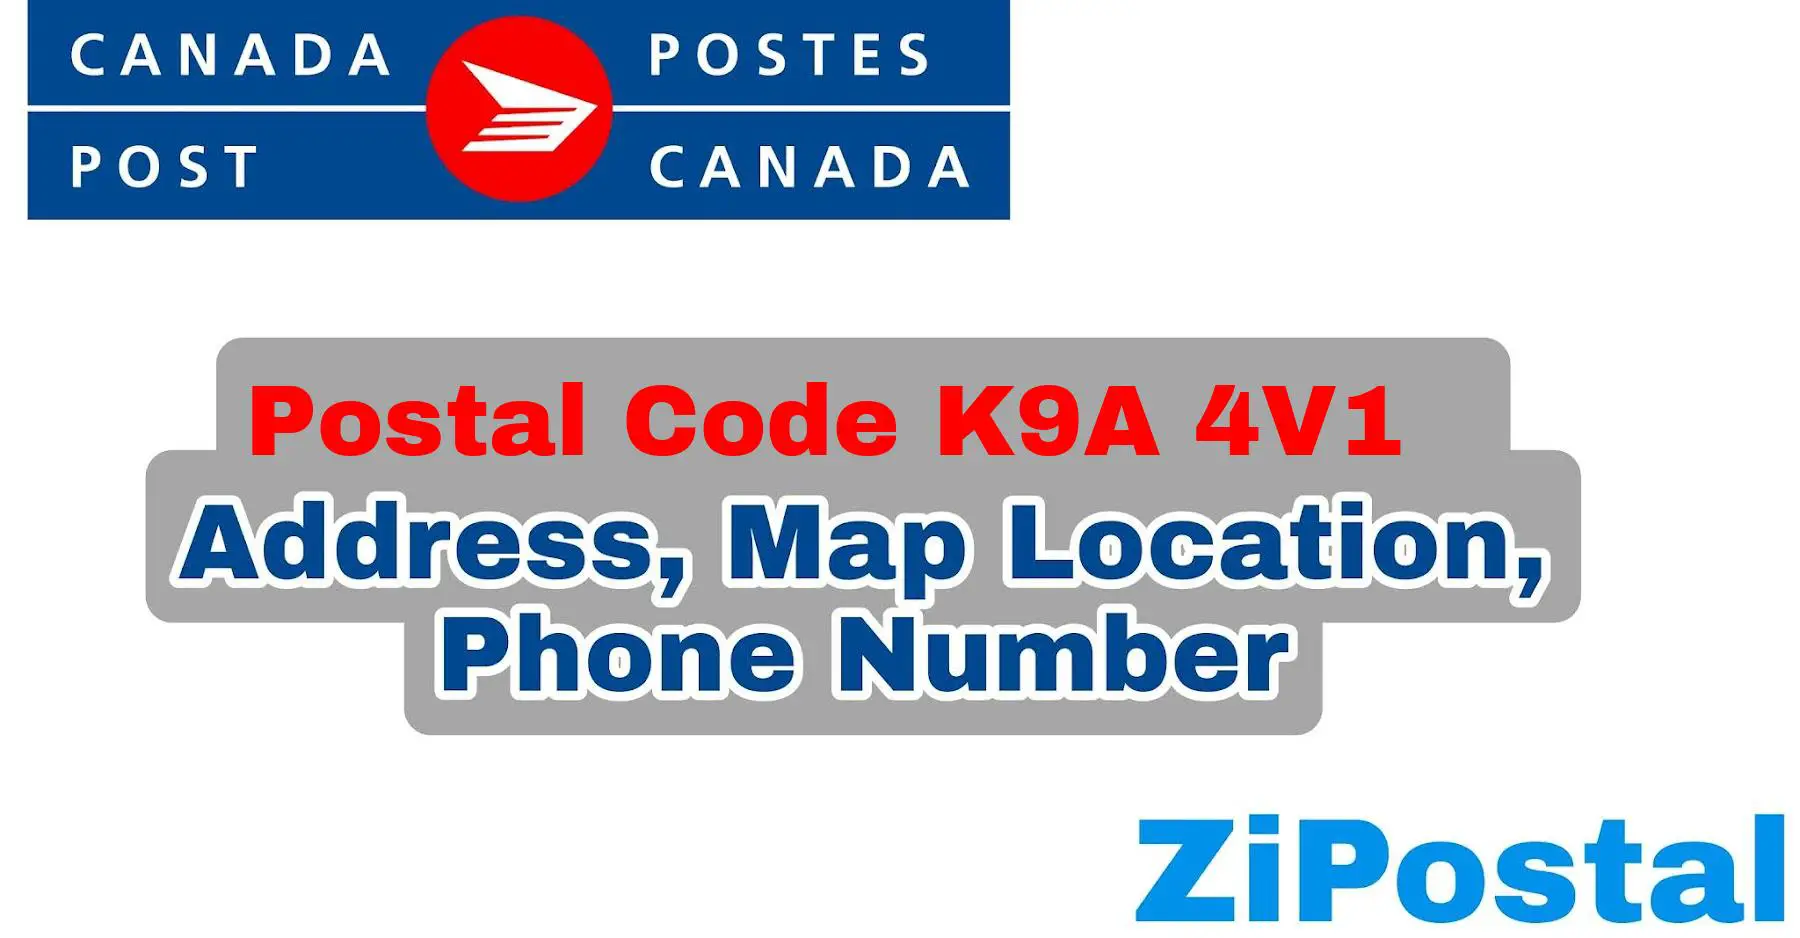 Postal Code K9A 4V1 Address Map Location and Phone Number